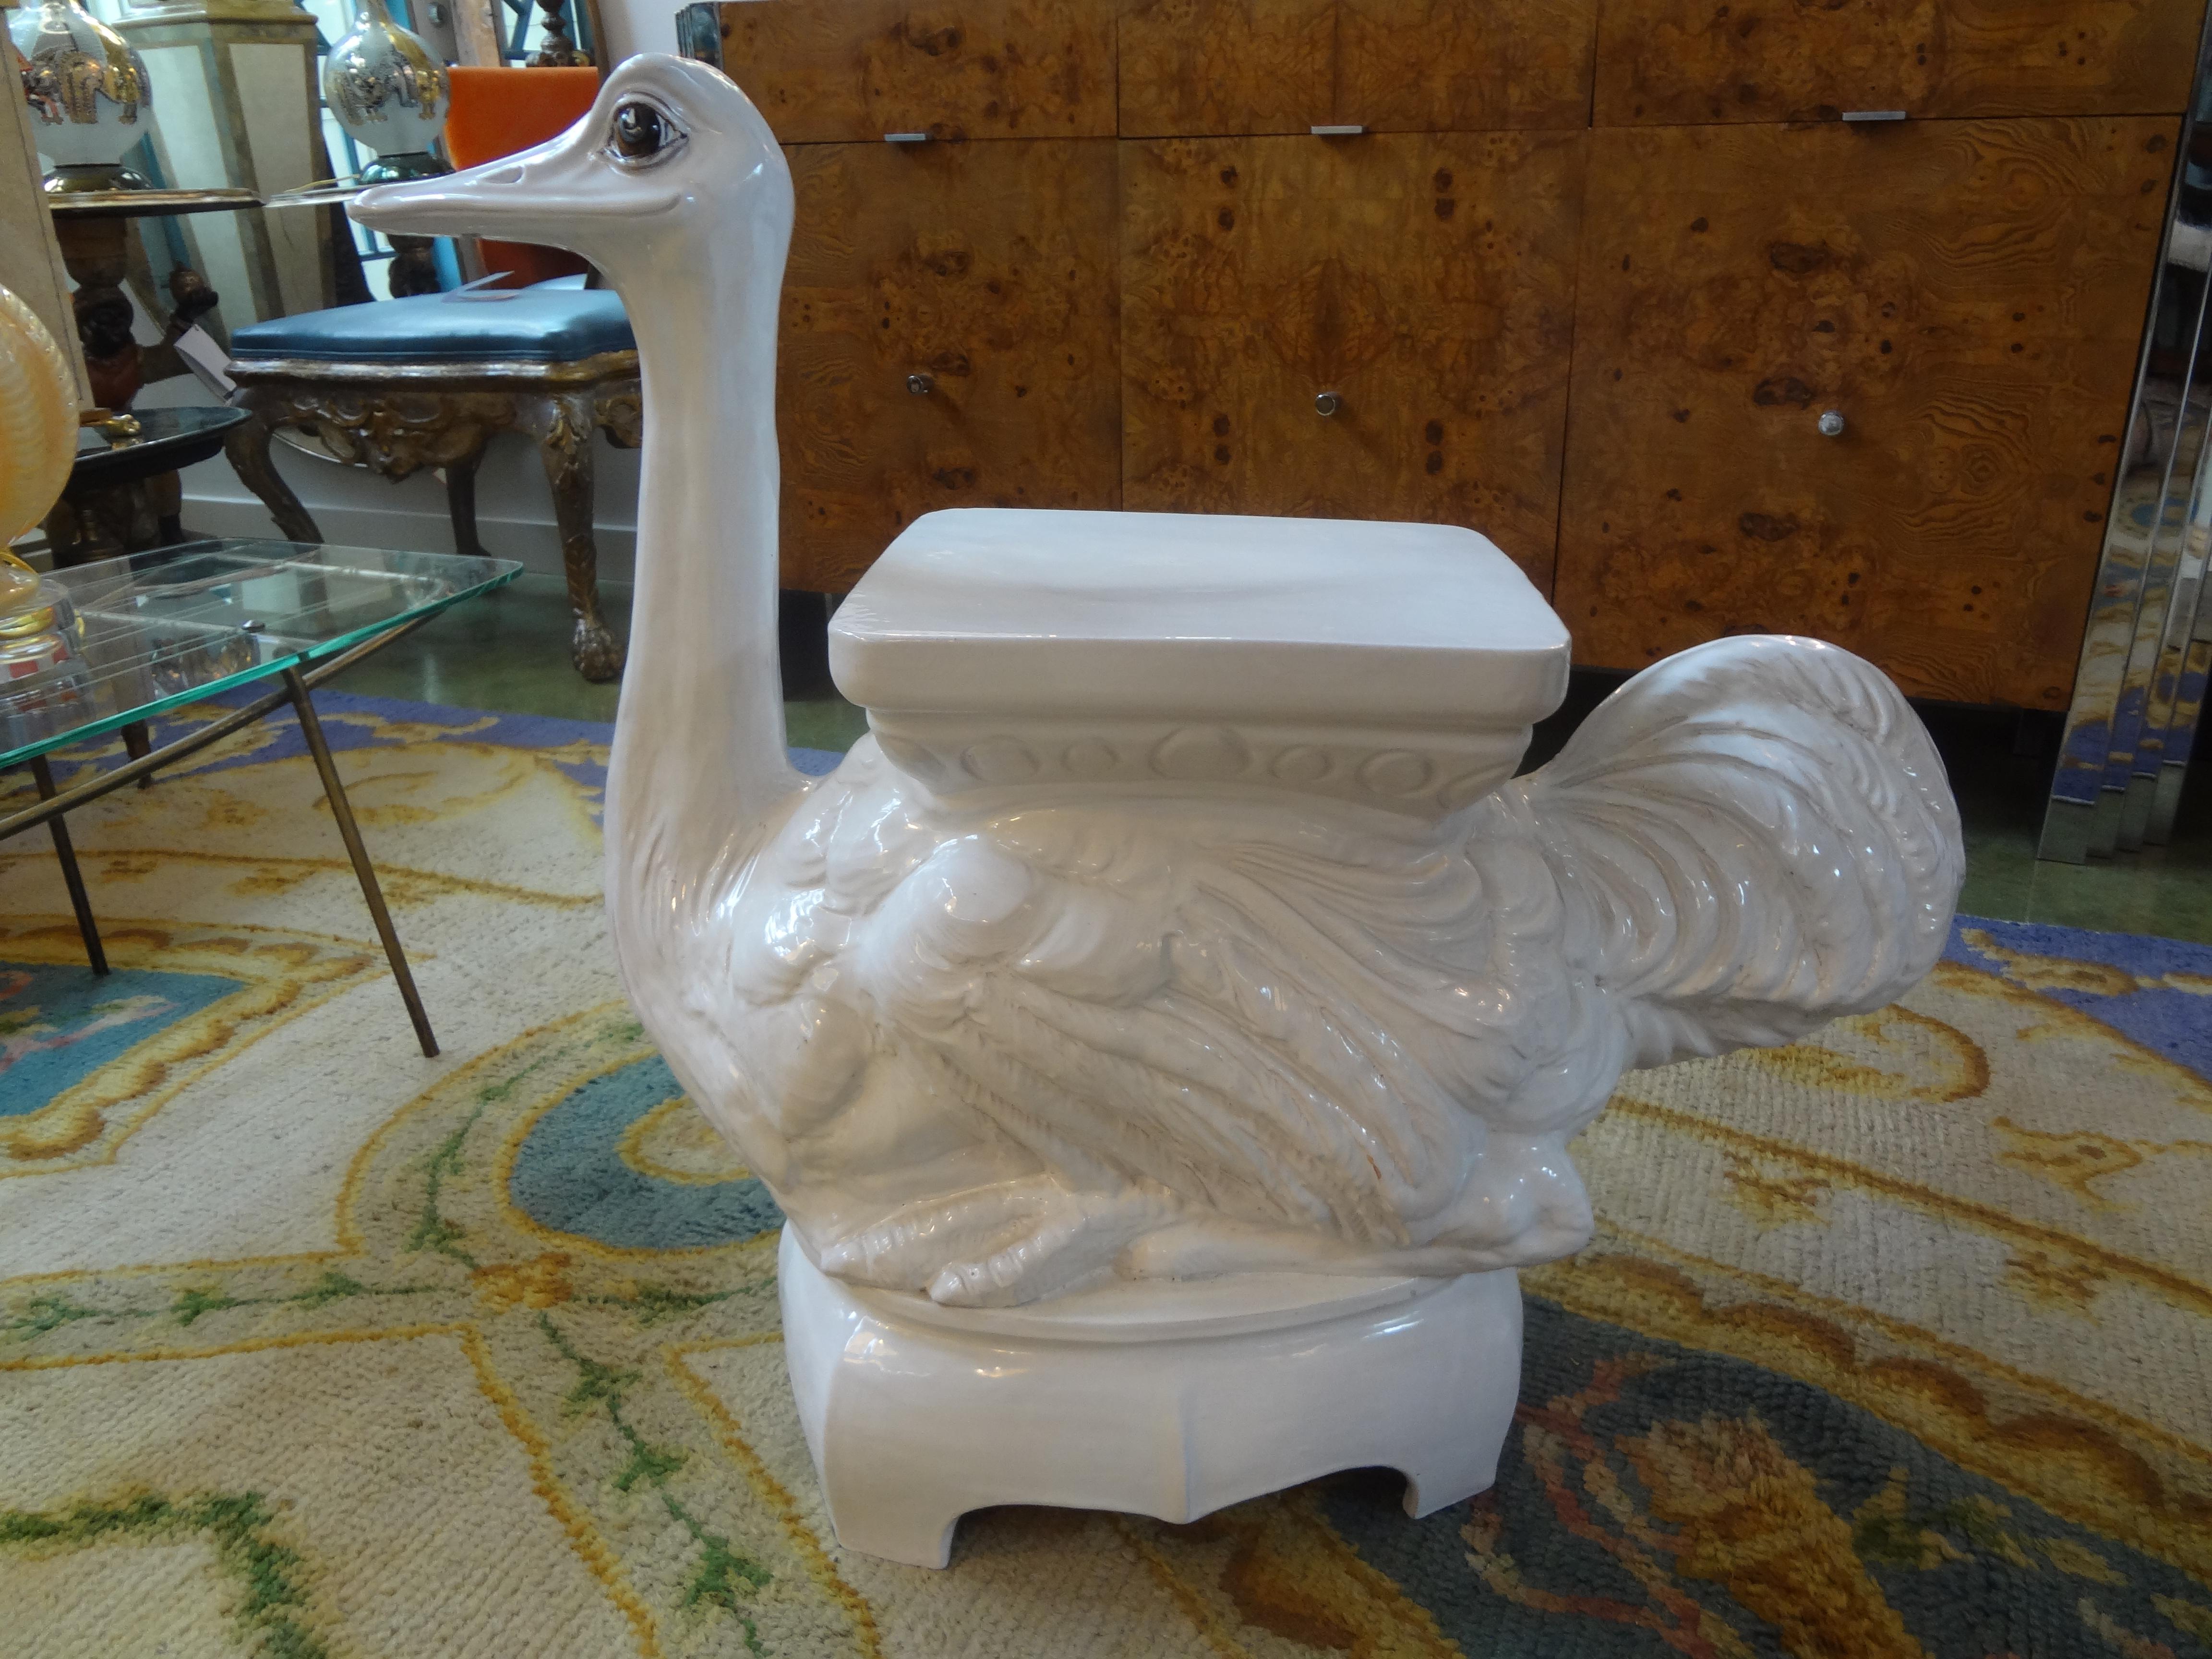 Most unusual and whimsical Italian white glazed terracotta garden seat or garden stool of an ostrich. This blanc de chine garden ornament can be used indoors or outdoors as a side table or end table. A versatile Italian Hollywood Regency piece that